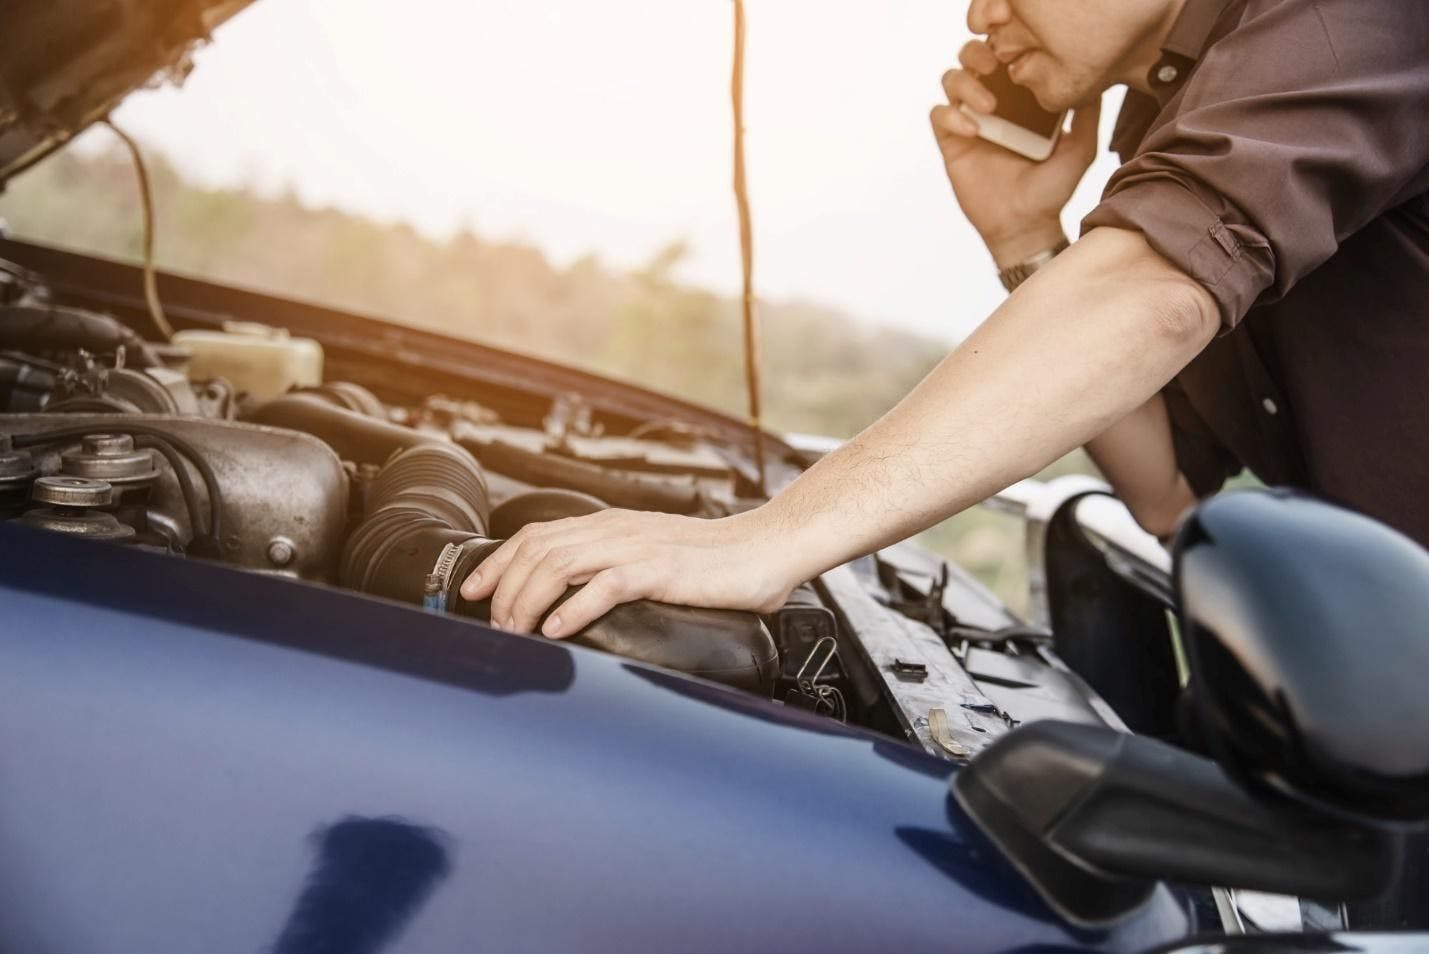 5 Jeep Services that are Essential for Off-Roading